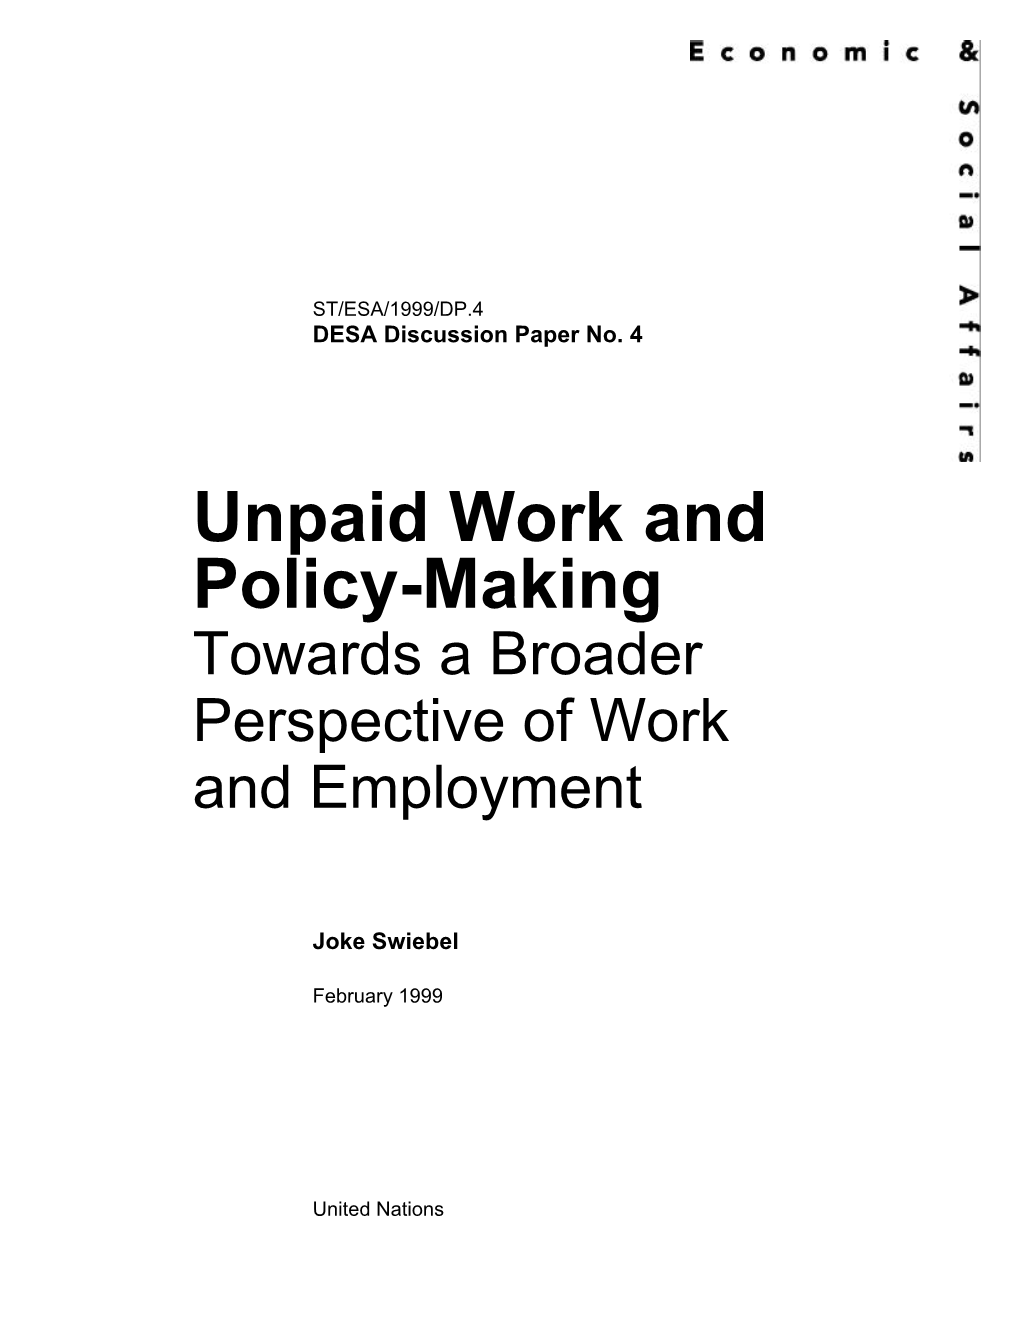 Unpaid Work and Policy-Making Towards a Broader Perspective of Work and Employment